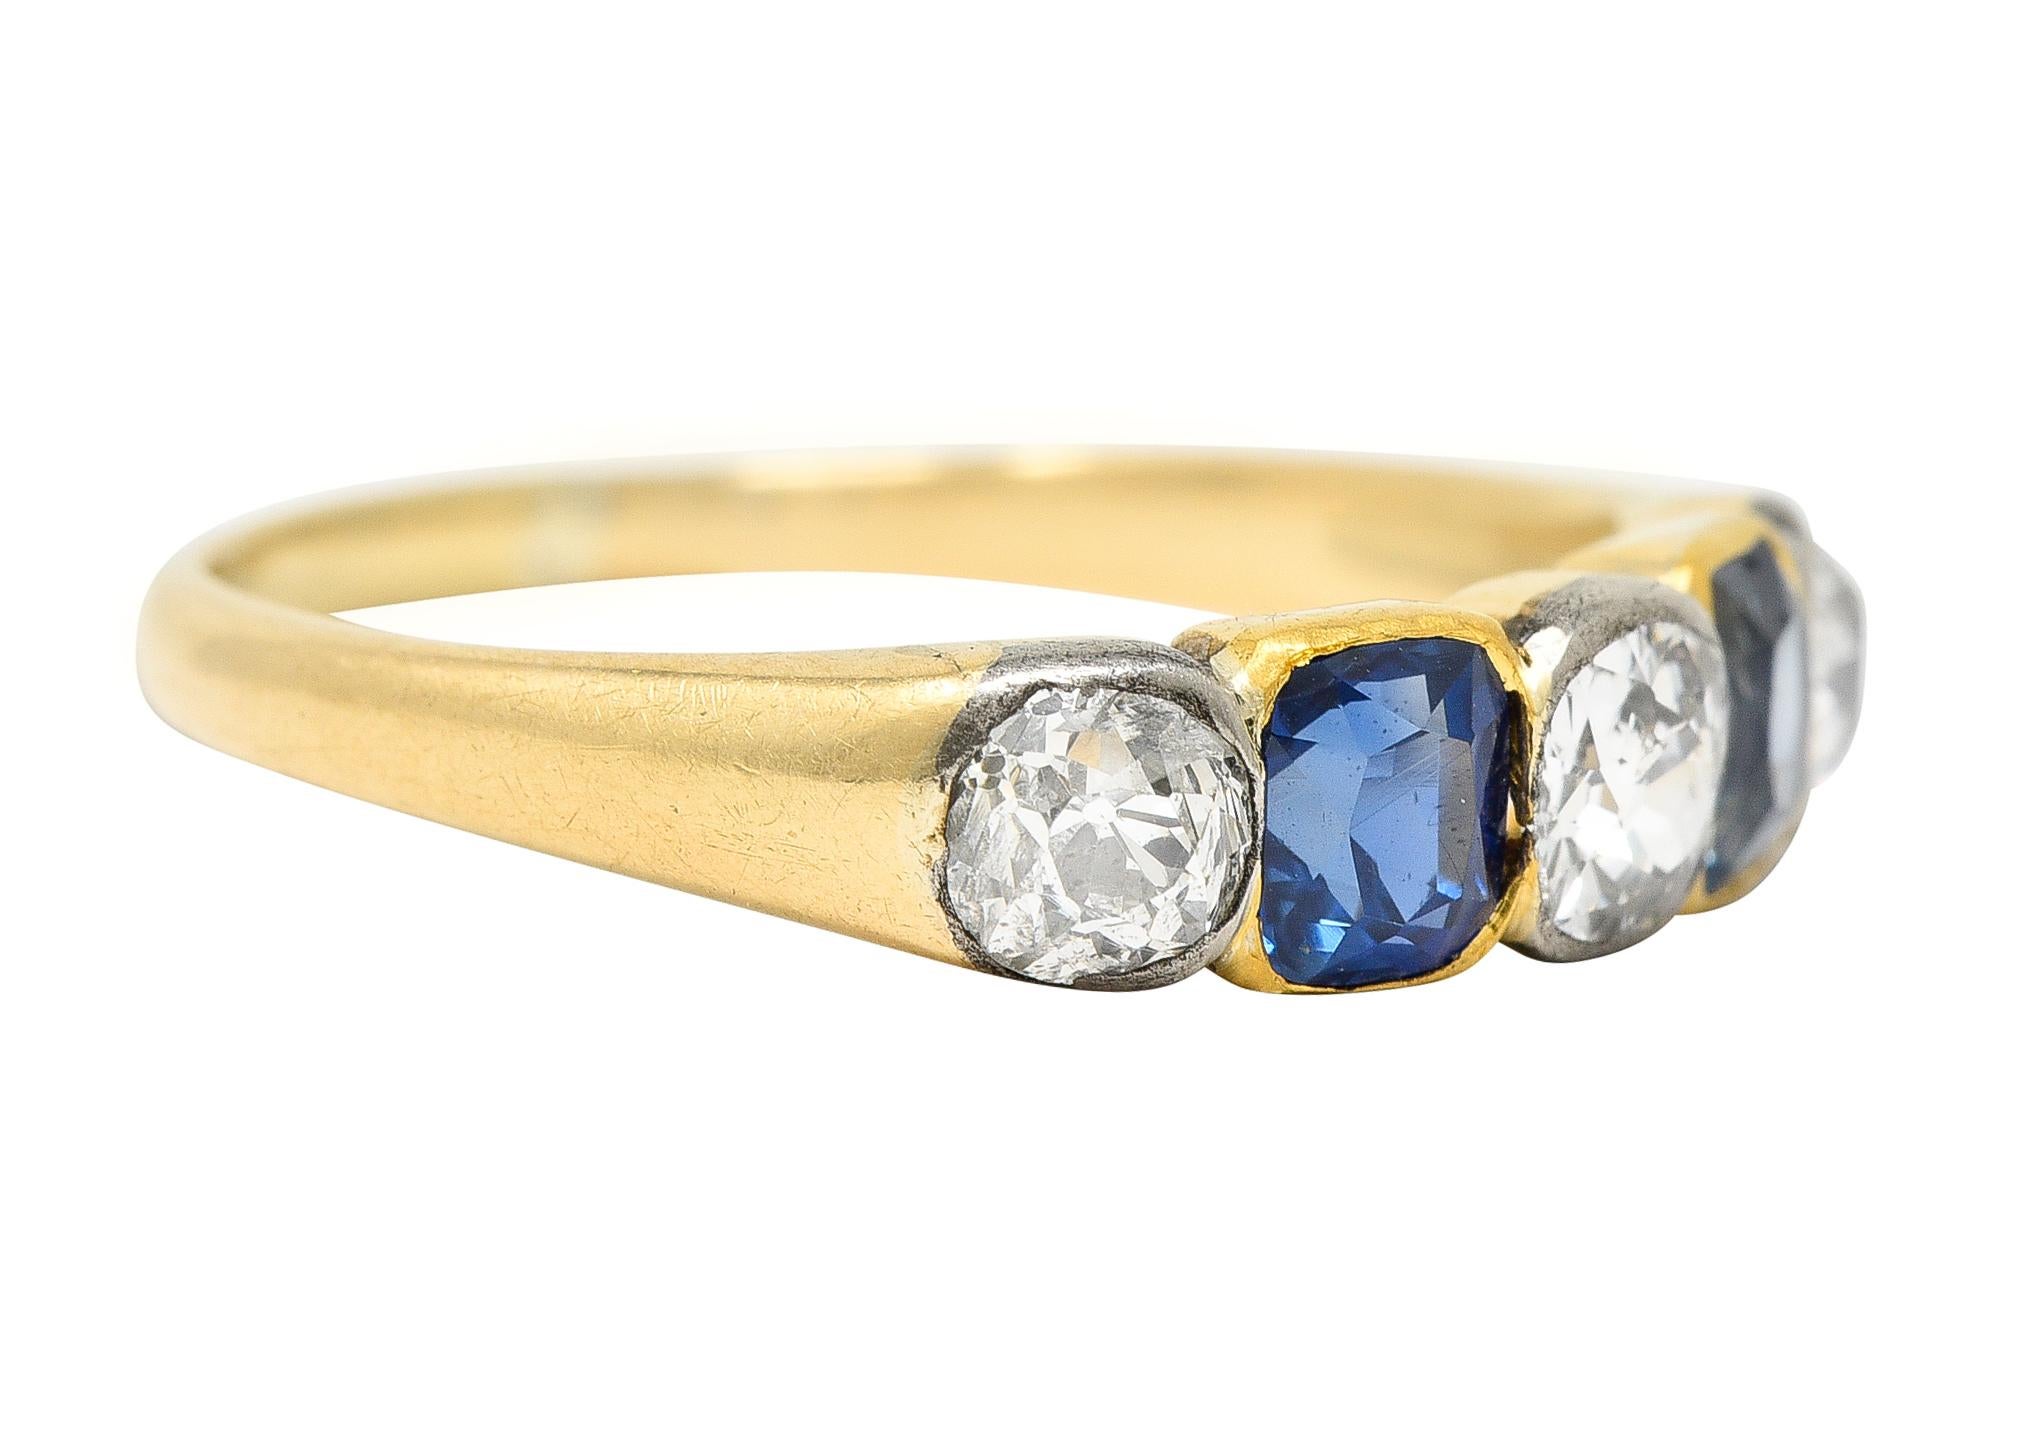 Featuring old mine cut diamonds and cushion cut sapphires - bezel set to front and alternating in pattern. Diamonds weigh approximately 0.85 carat total - H/I color with I2 clarity - set in platinum. Sapphires weigh approximately 0.78 carat total -